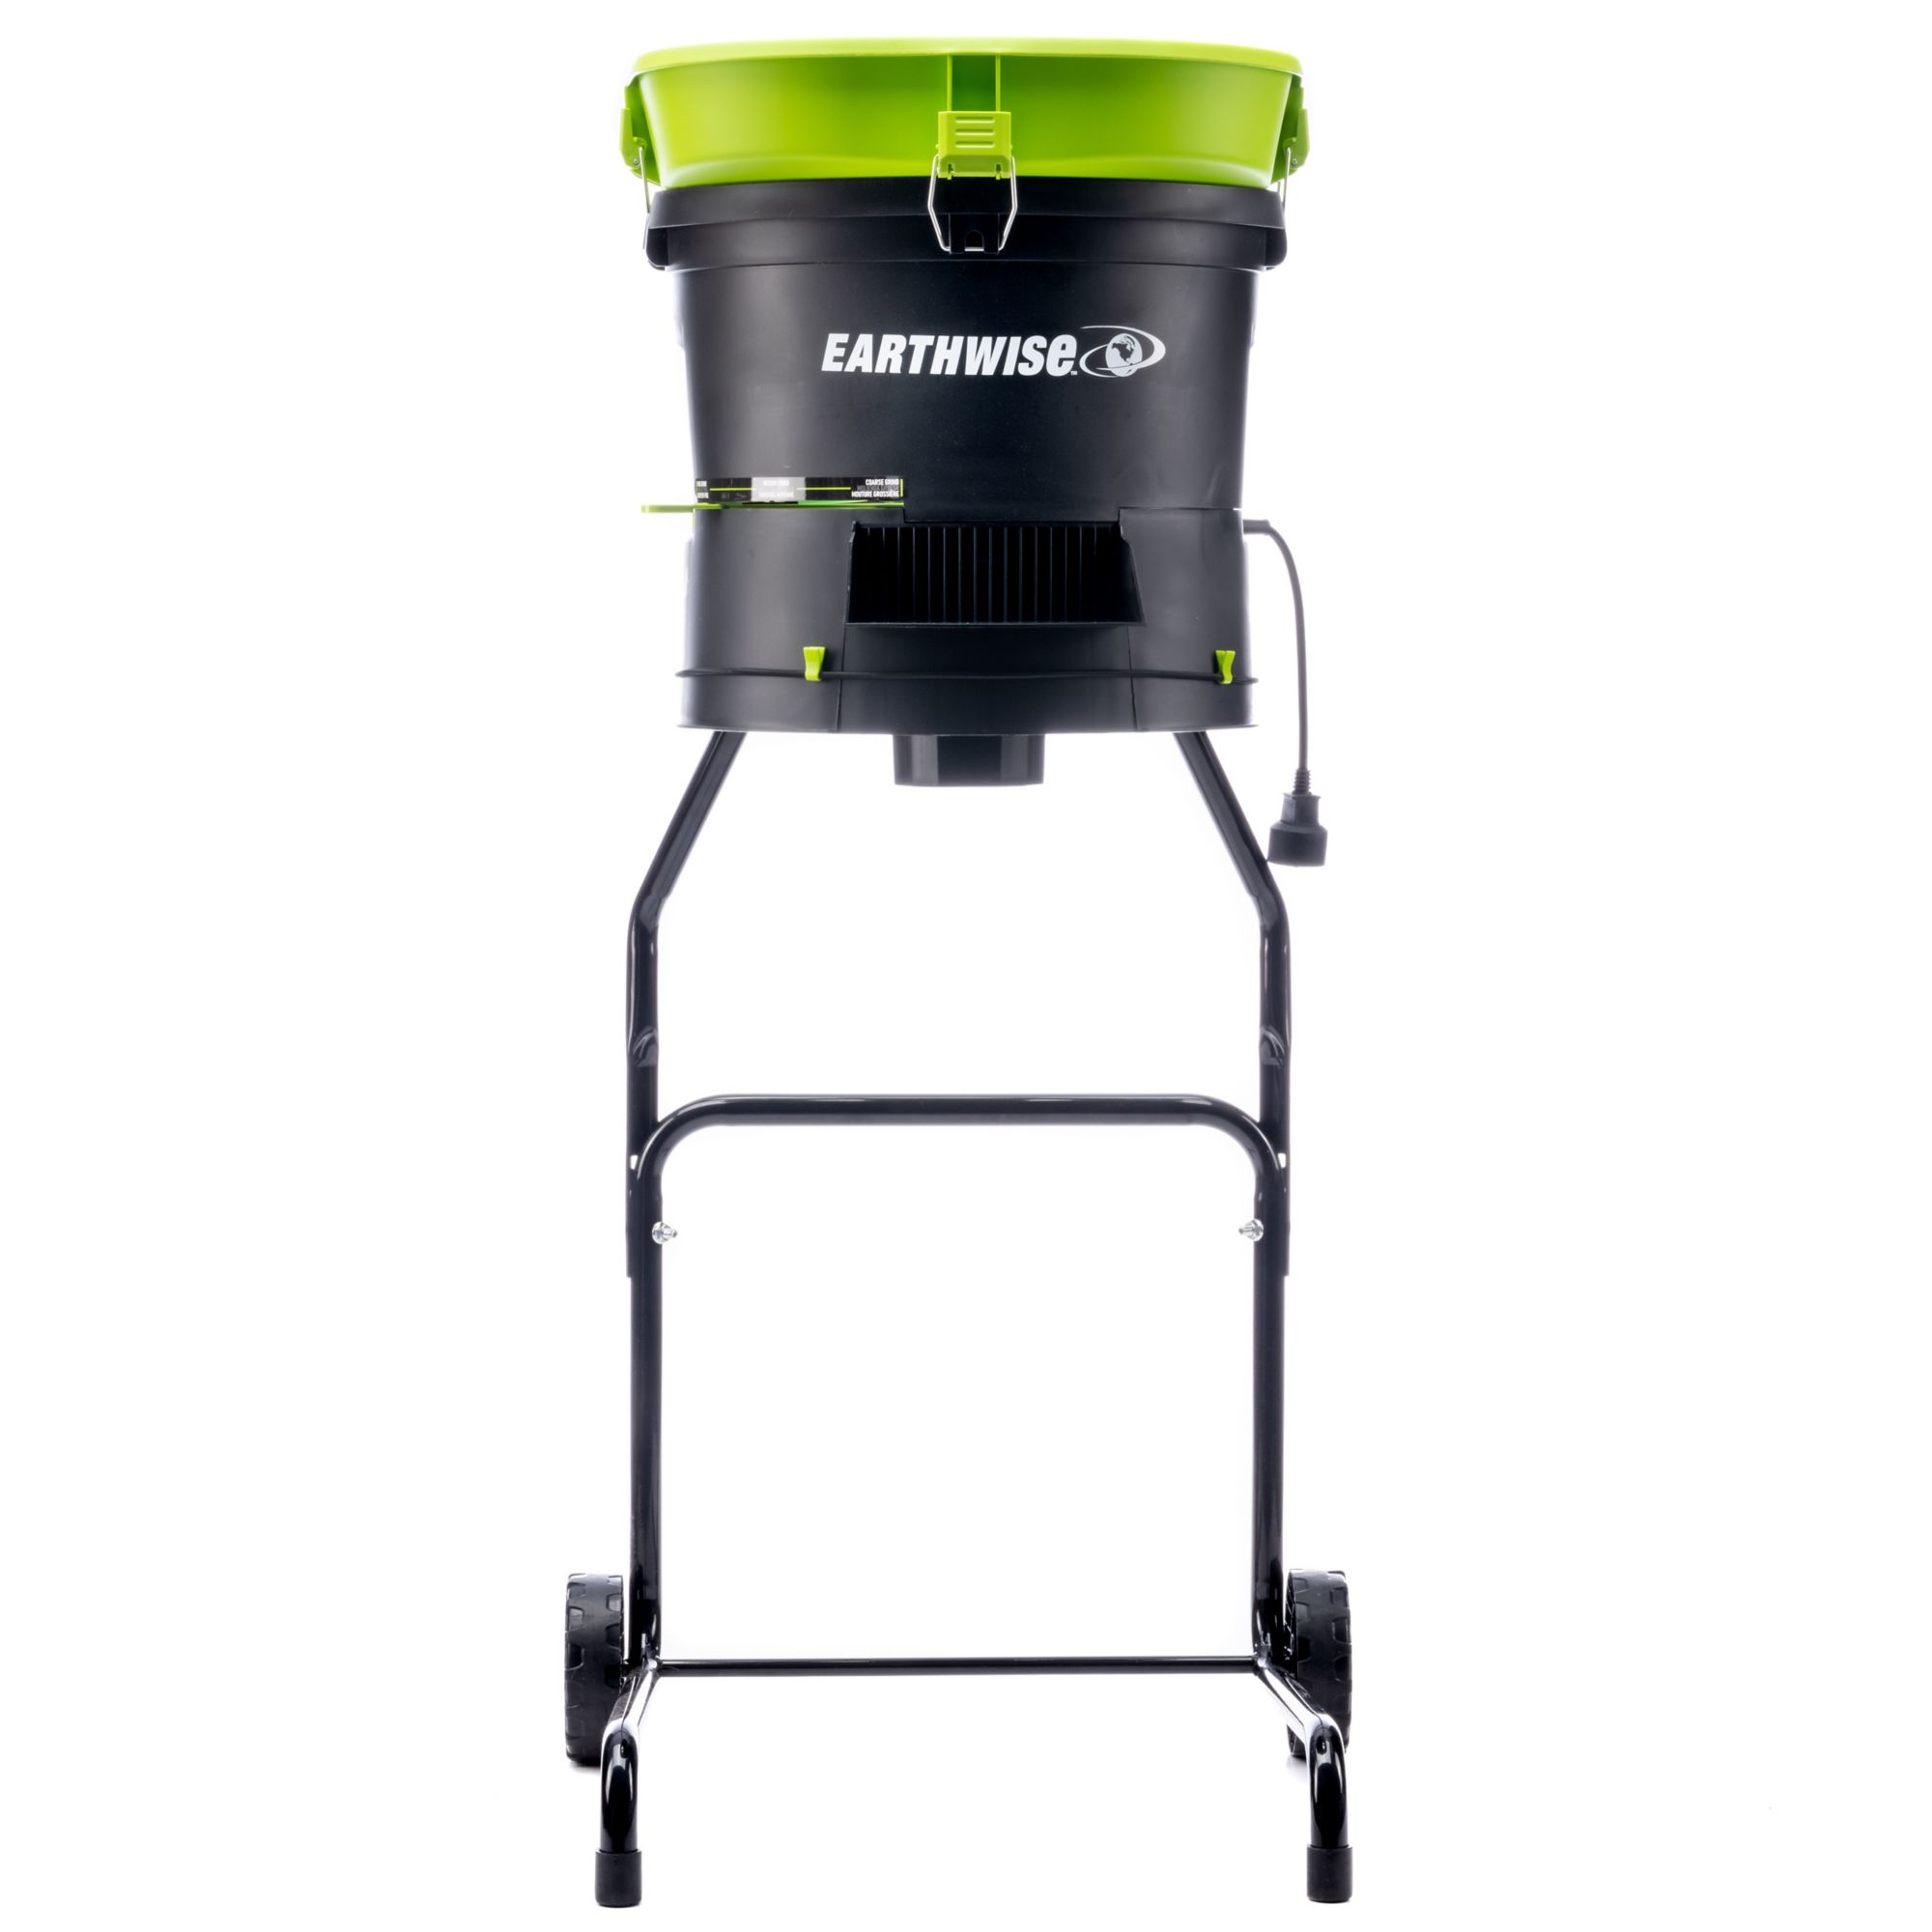 Earthwise 15-Amp Electric Corded Chipper Shredder with Collection Bag